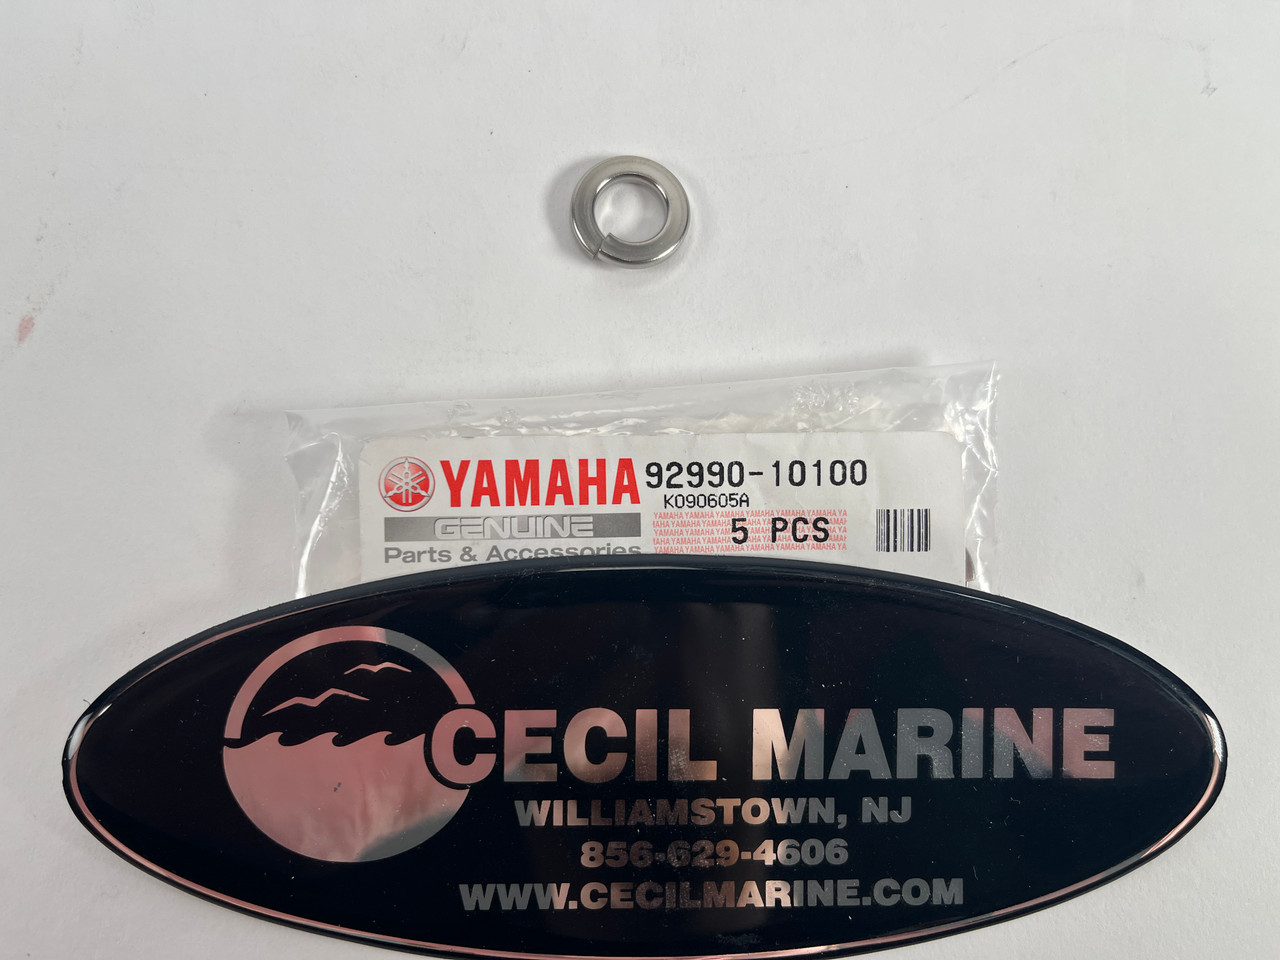 $6.99* GENUINE YAMAHA no tax* WASHER,SPRING 92990-10100-00 *In Stock & Ready To Ship